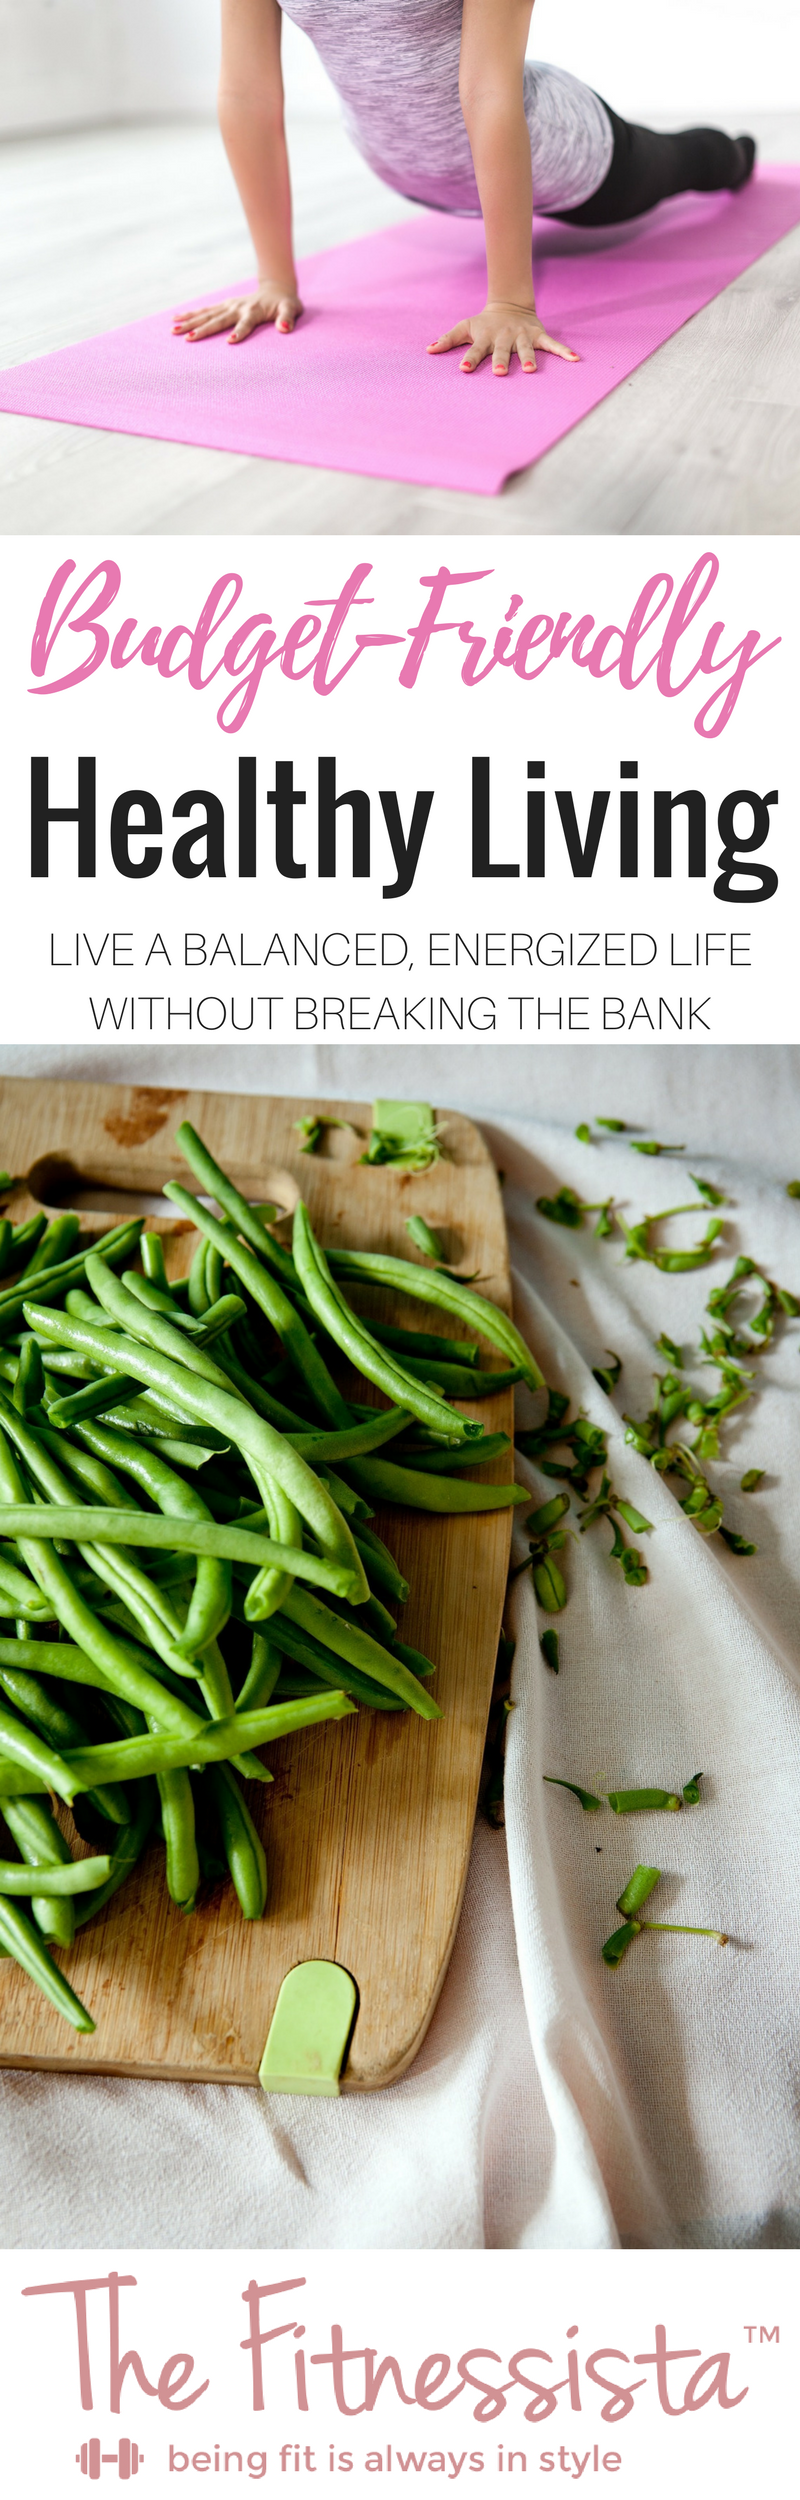 Healthy Living on a Budget - The Fitnessista